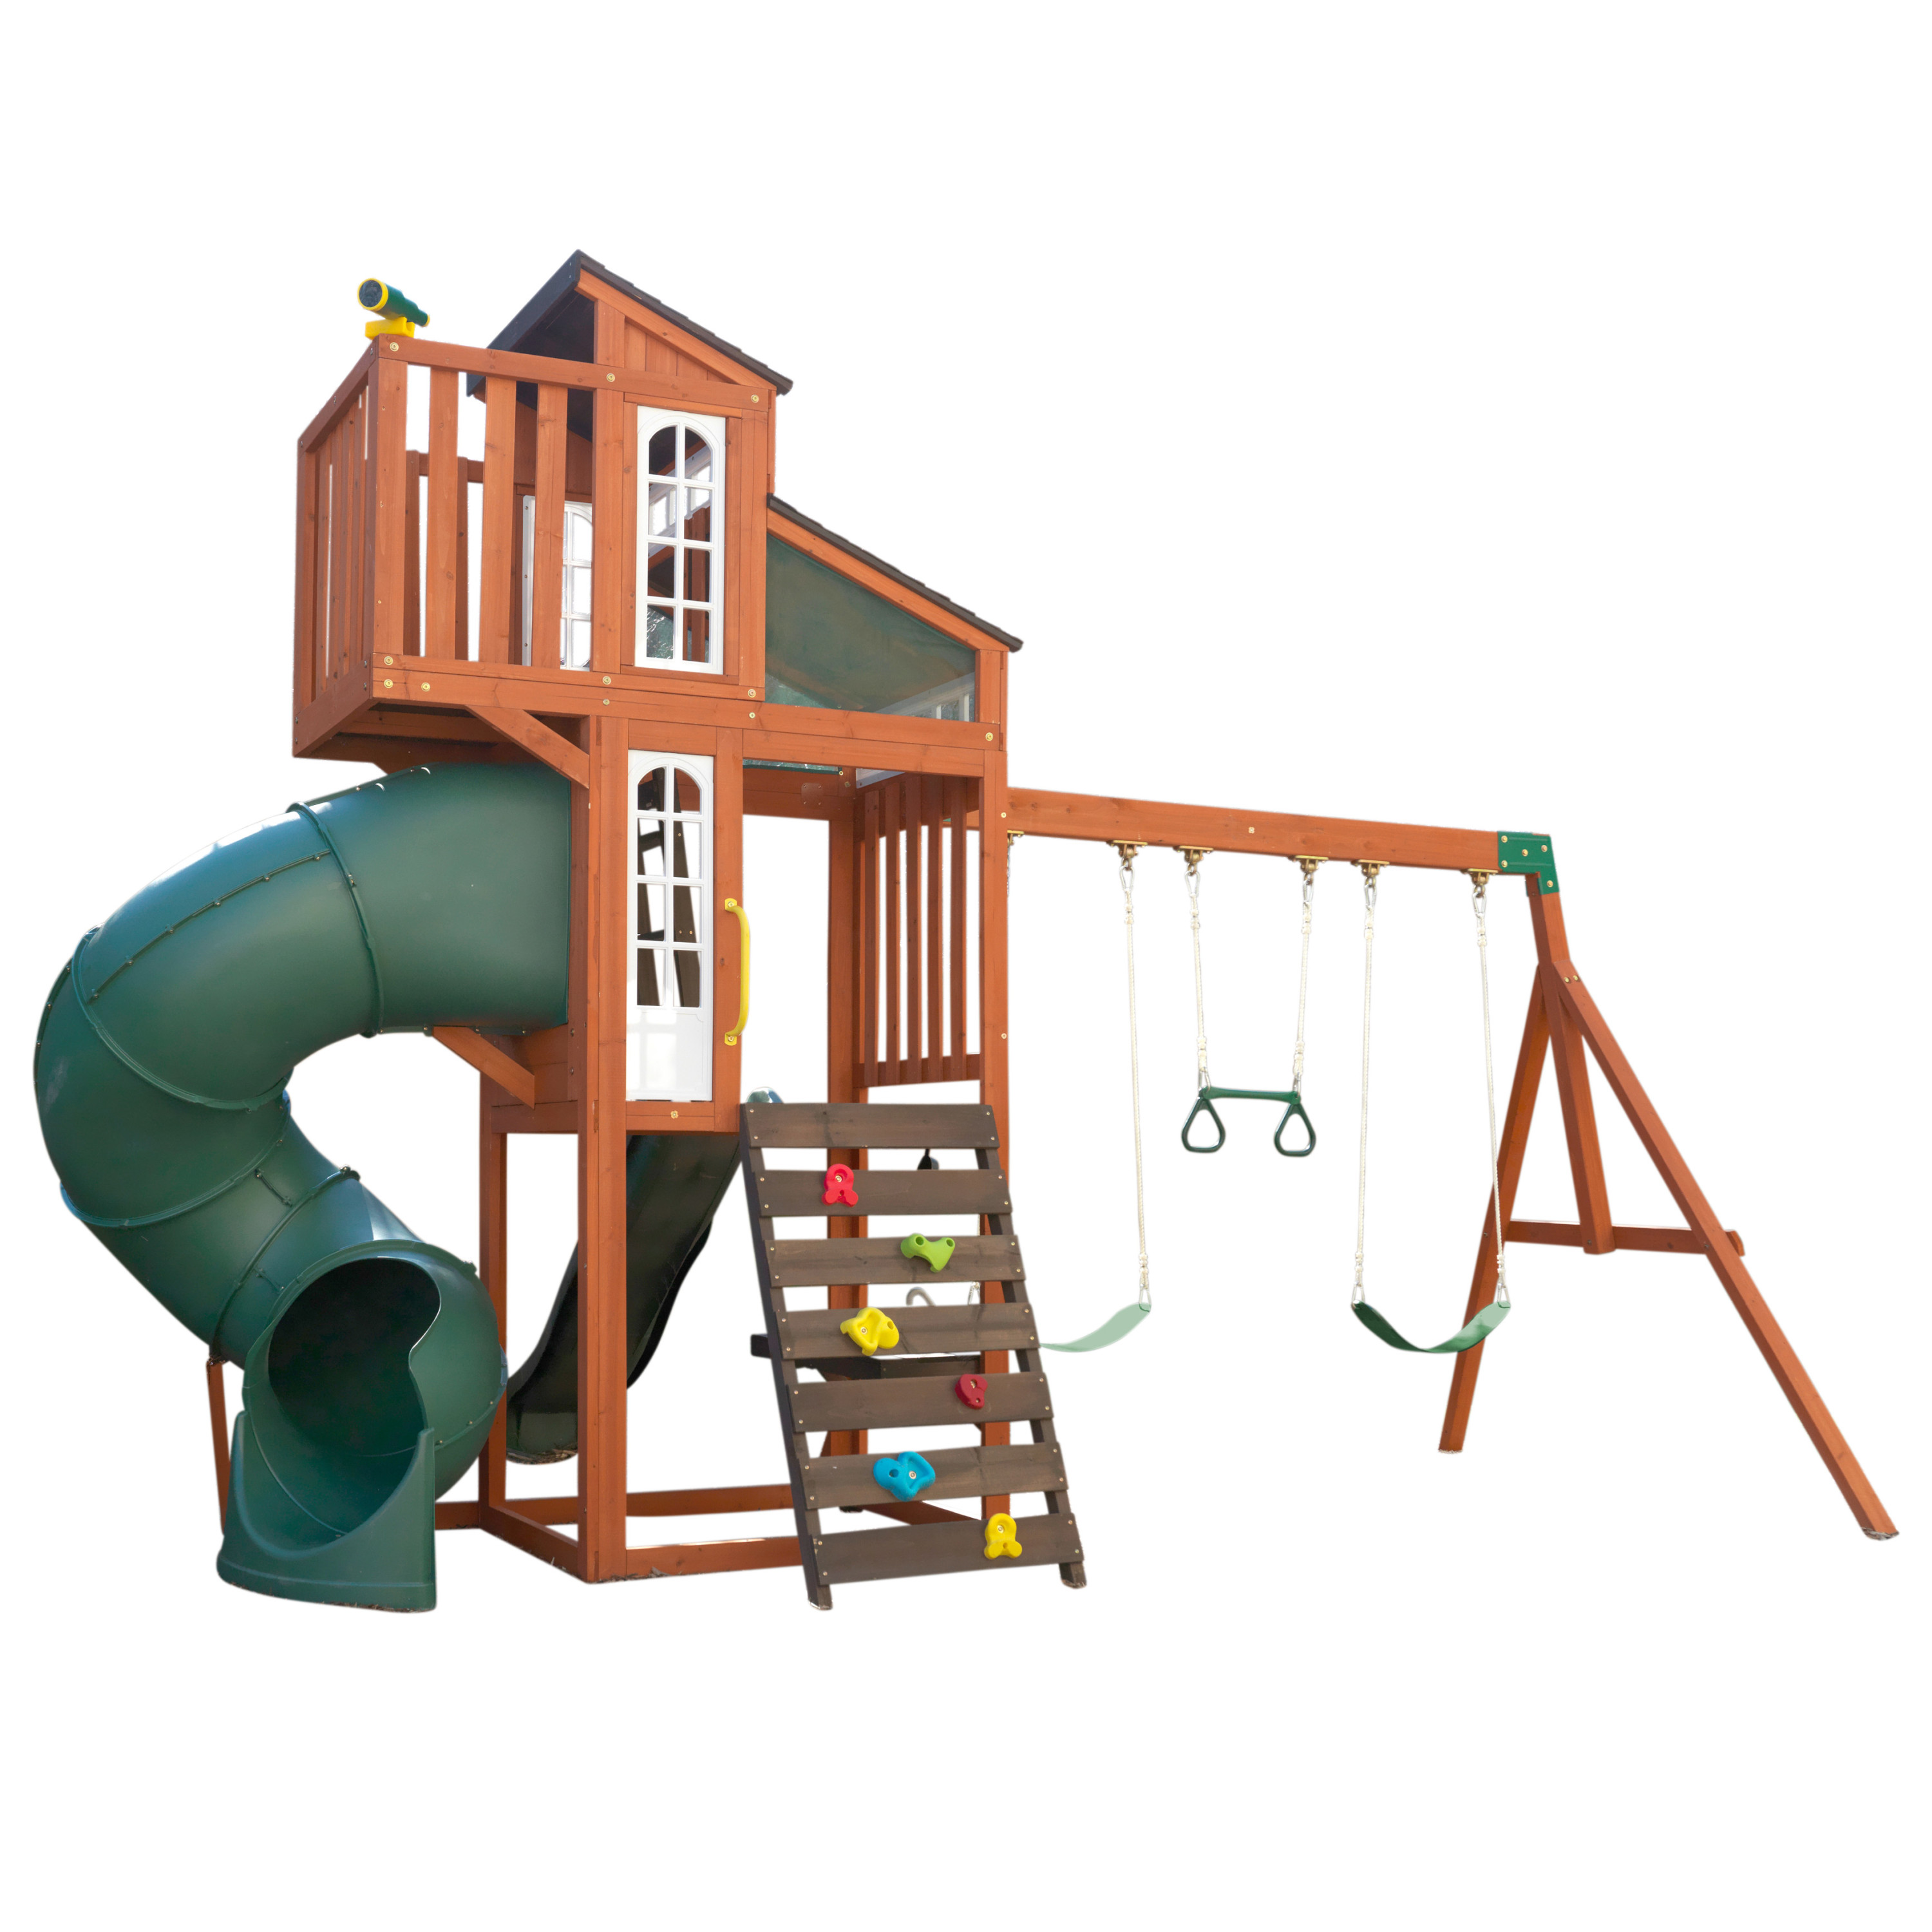 KidKraft Austin Wooden Outdoor Swing Set with Slides, Swings, Kitchen and Rock Wall - image 1 of 27